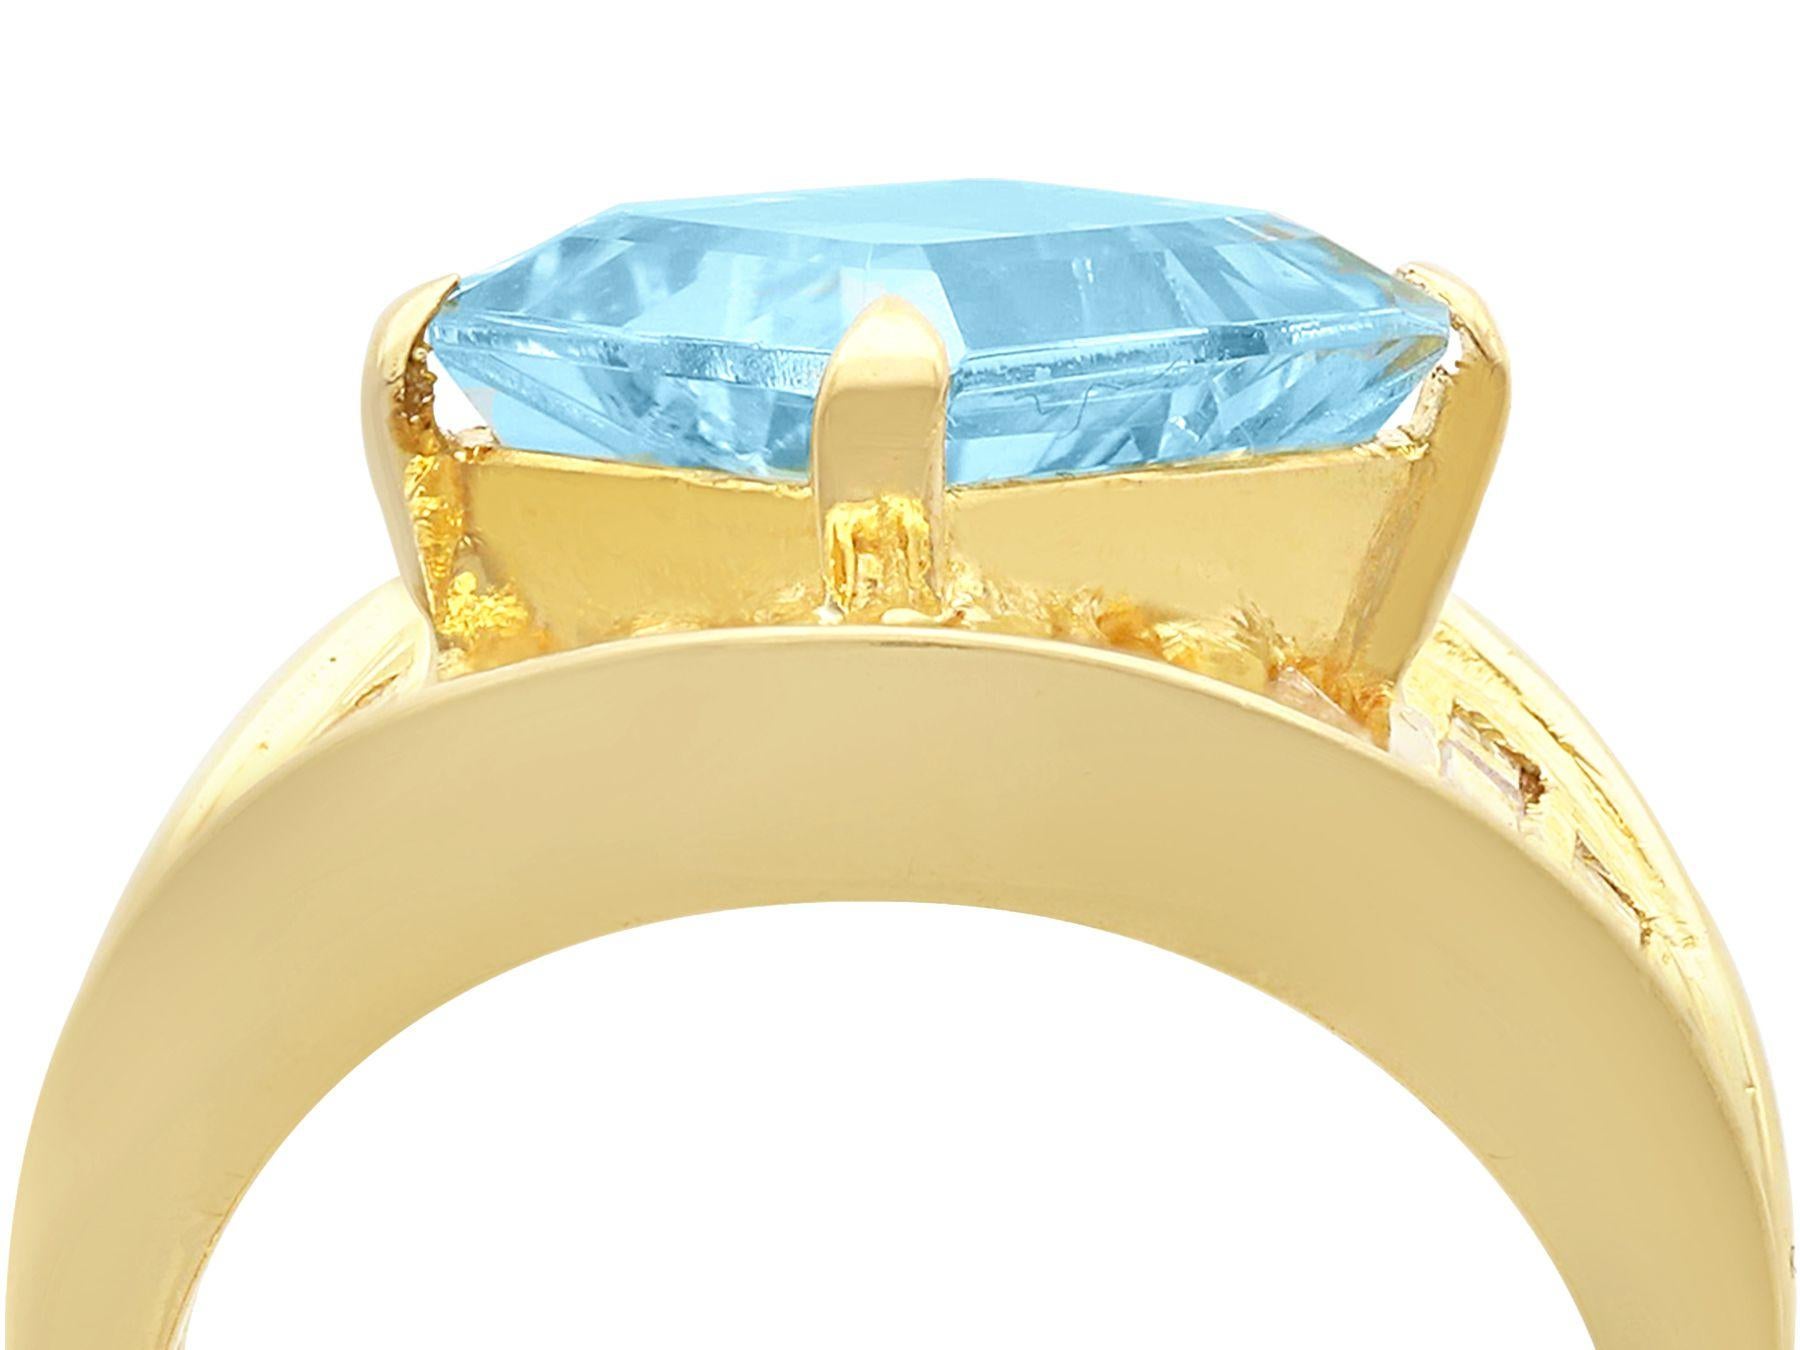 A stunning, fine and impressive 3.33 carat aquamarine and 1.55 carat diamond, 18 karat yellow gold dress ring; part of our diverse aquamarine jewellery collections.

This stunning, fine and impressive contemporary aquamarine ring has been crafted in